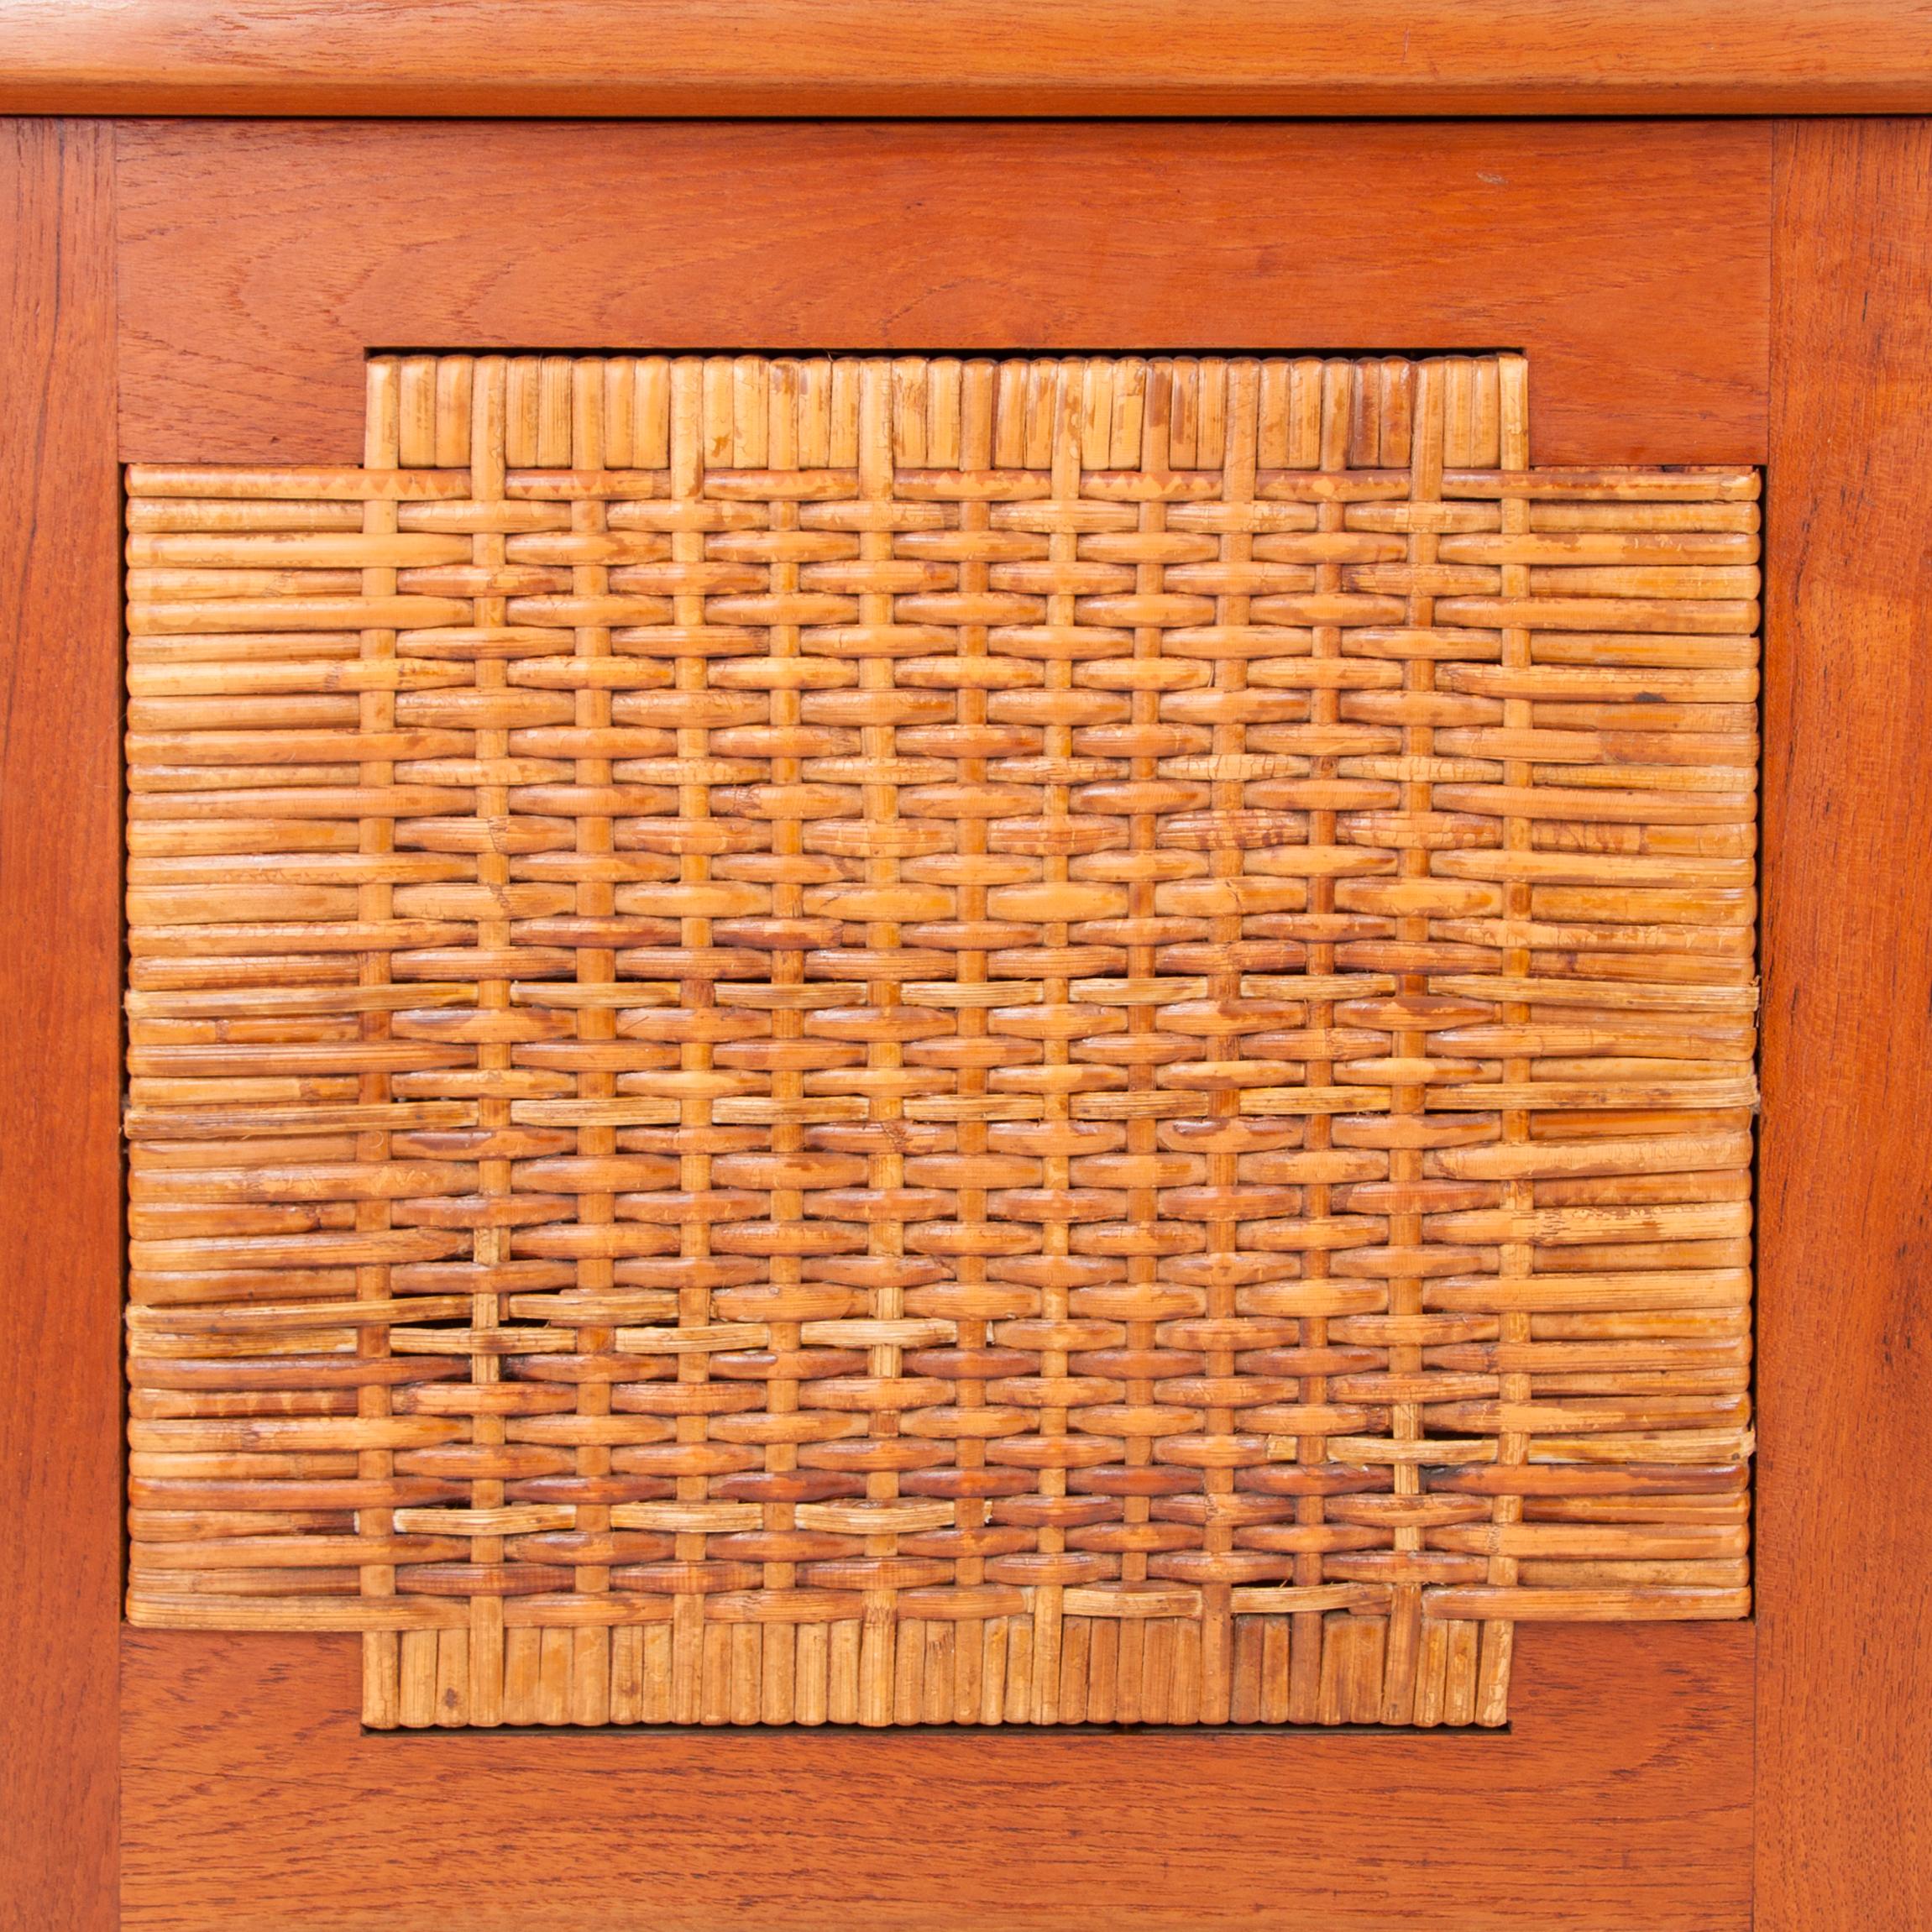 A beautiful midcentury teak and woven wickerwork / cane chest from the 1960s, model PH52, designed by Kai Winding for Poul Hundevad, Vamdrup, Denmark. In excellent condition.